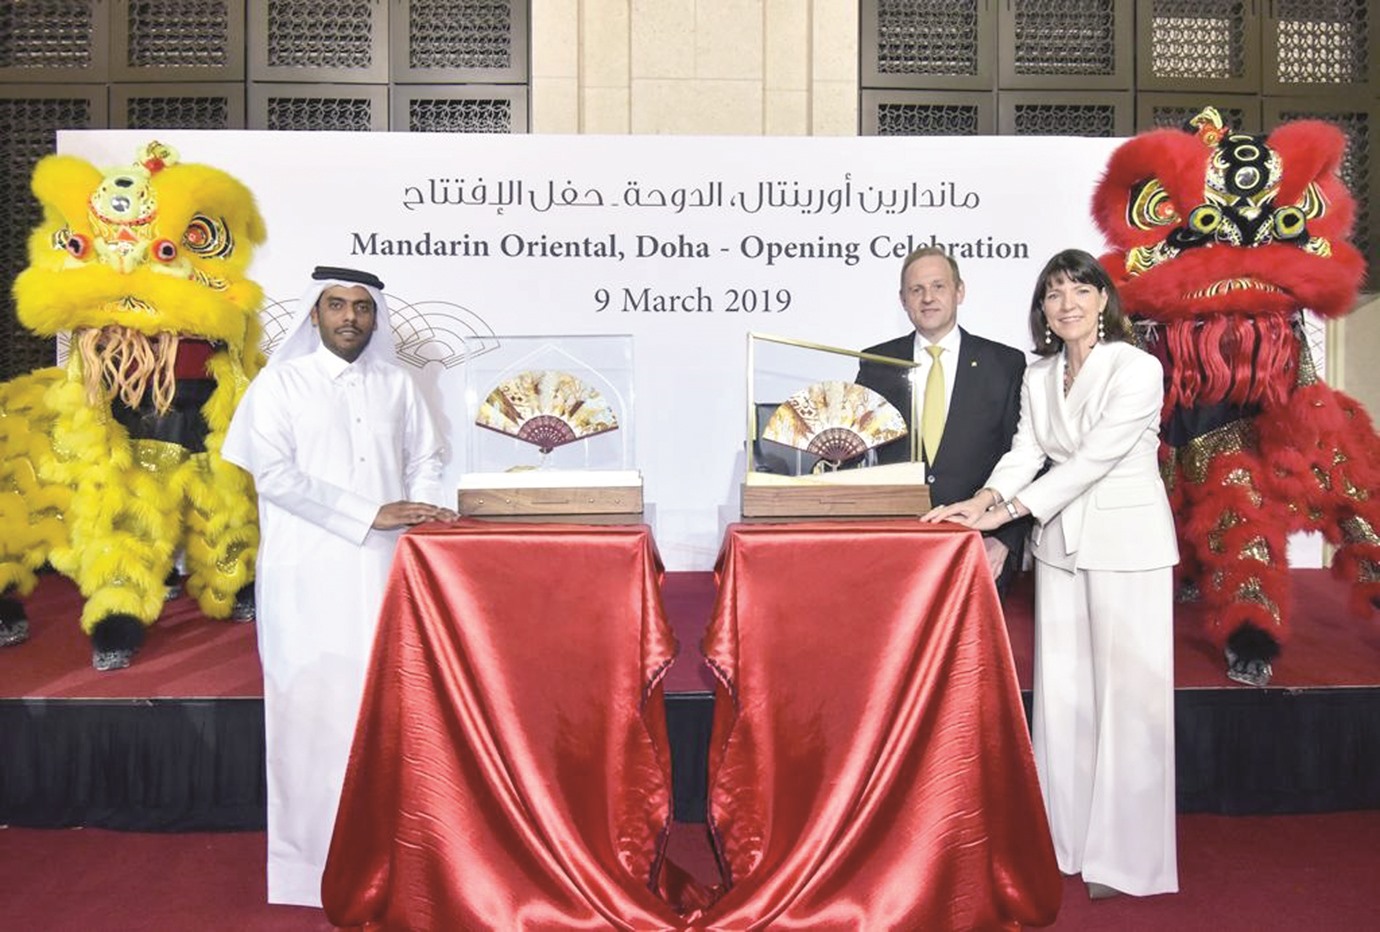 Mandarin Oriental, Doha opens with unveiling of signature fan